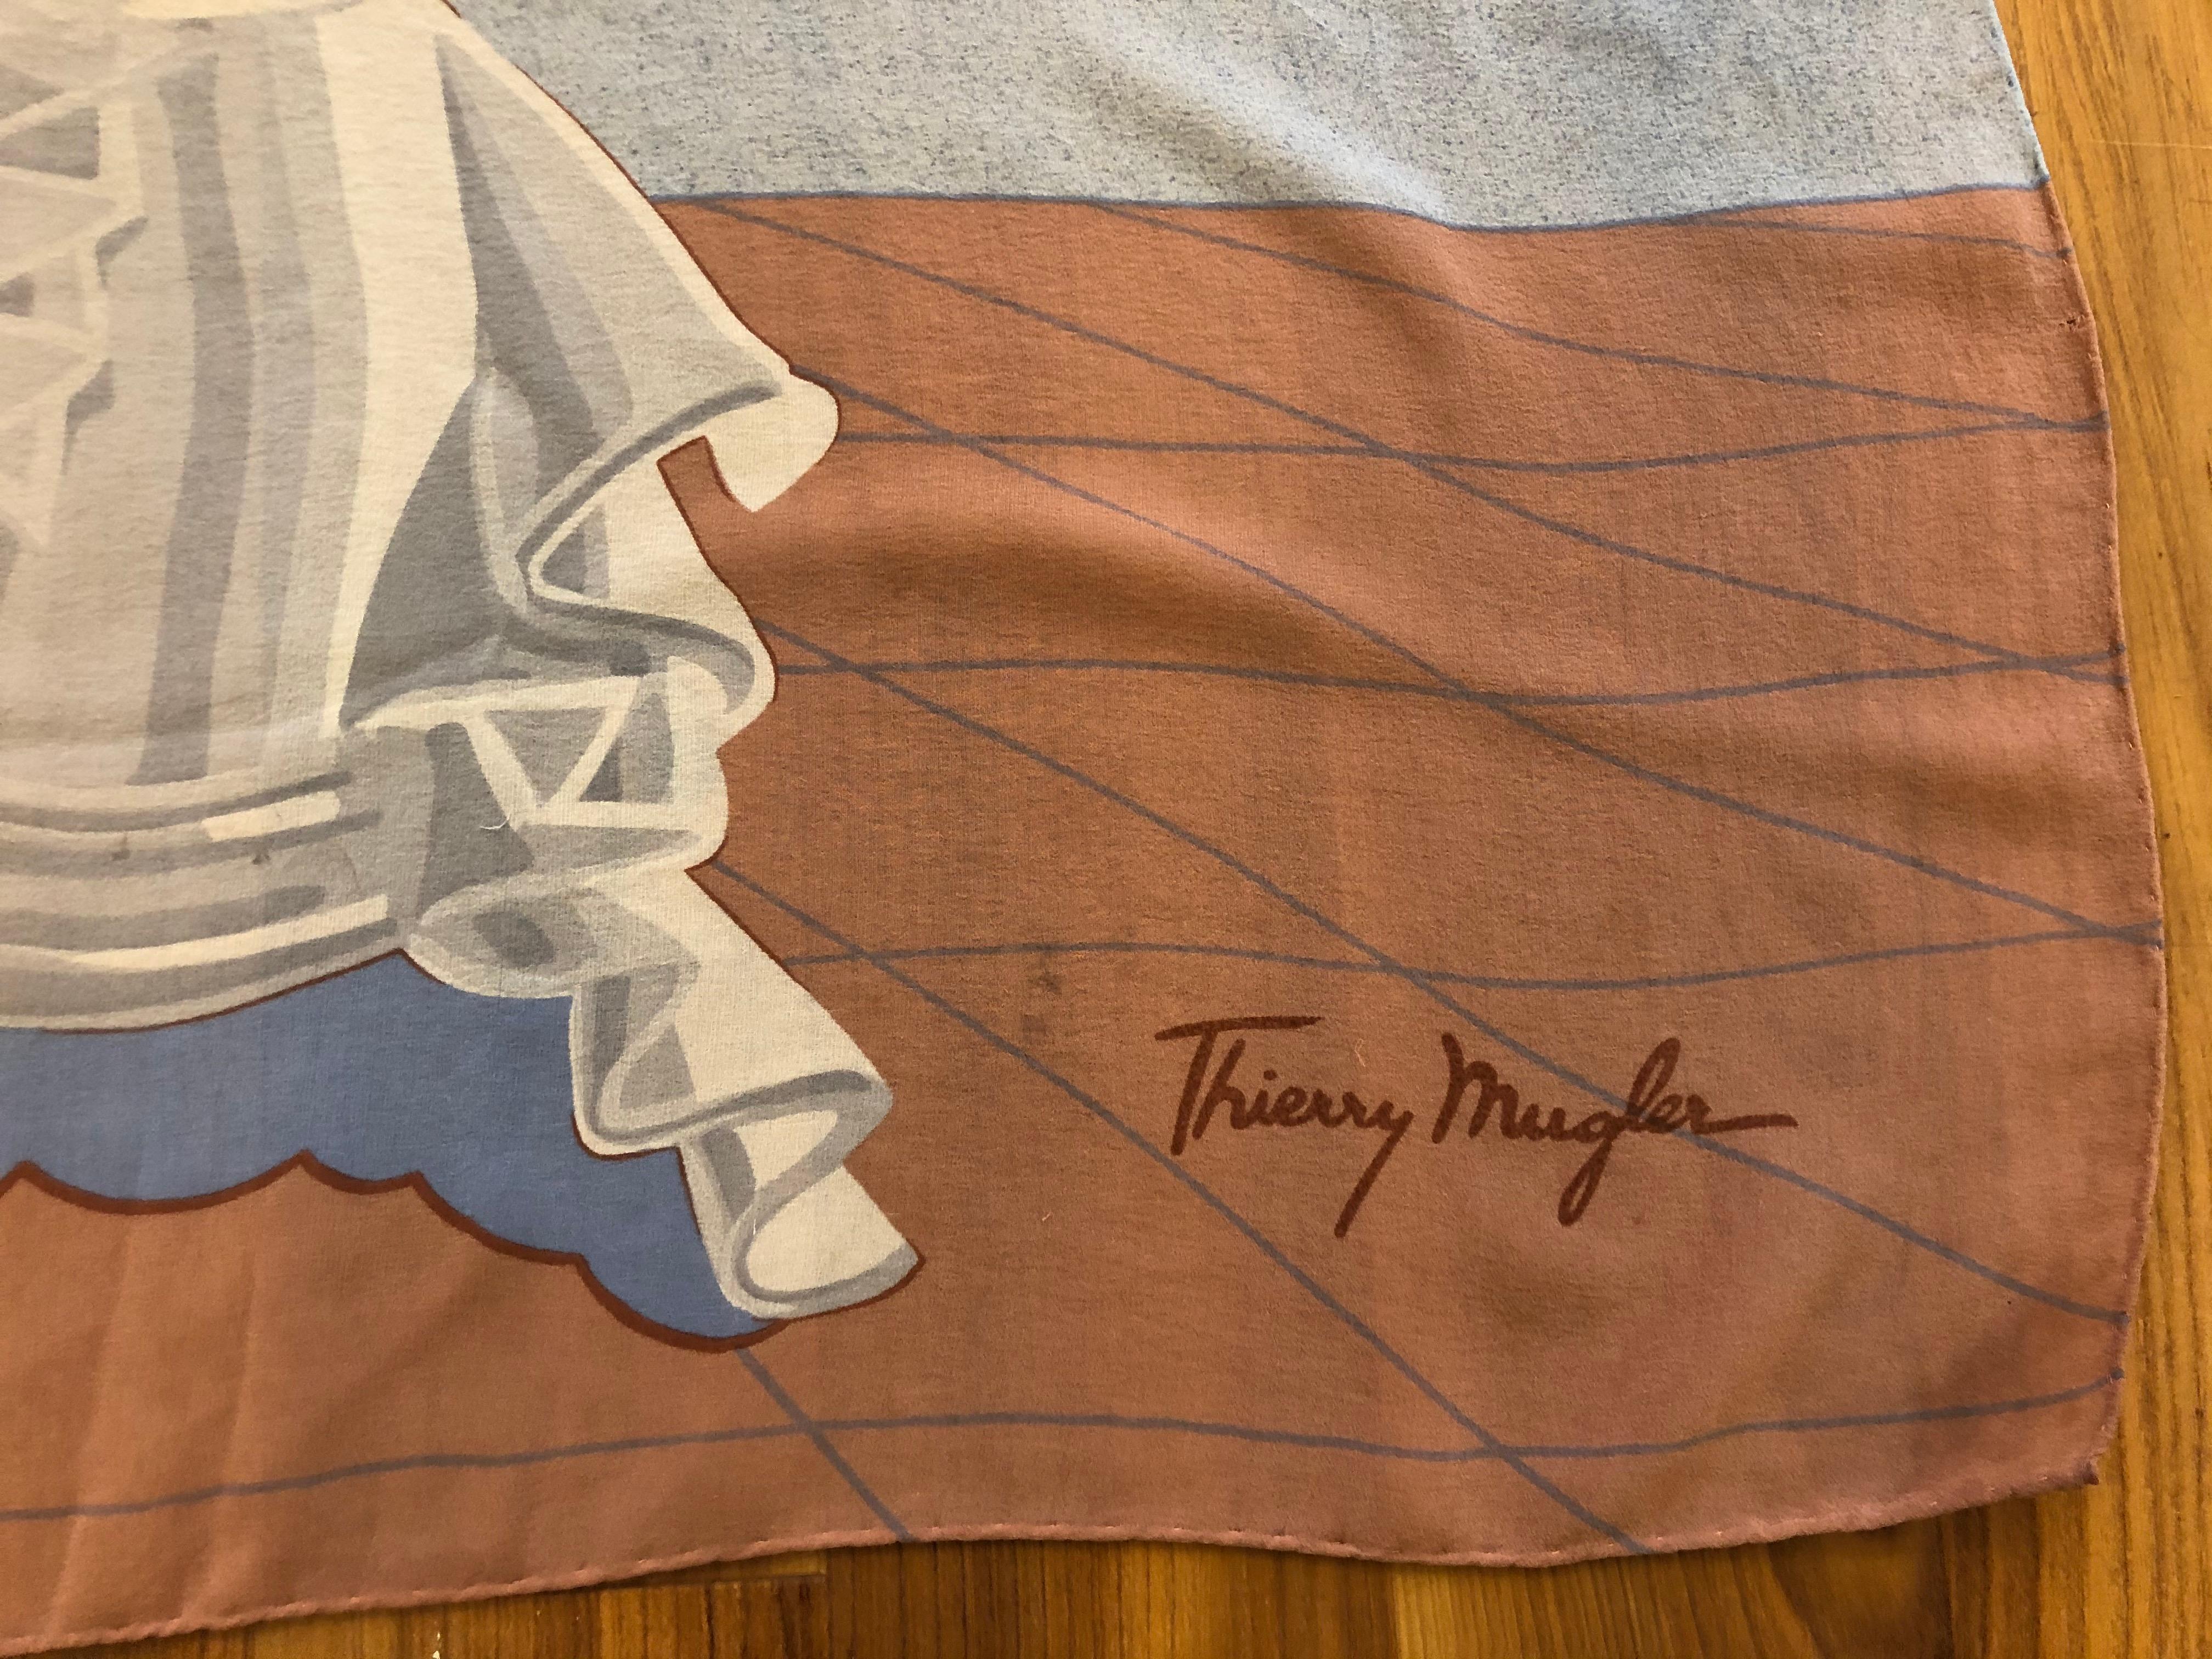 This is a superb Thierry Mugler silk chiffon scarf with Dali inspired graphics from the surrealist movement. In fact, Dali designed perfume bottles for Thierry Mugler.

The background of this scarf is grey/blue, with blue, grey and orange tones.